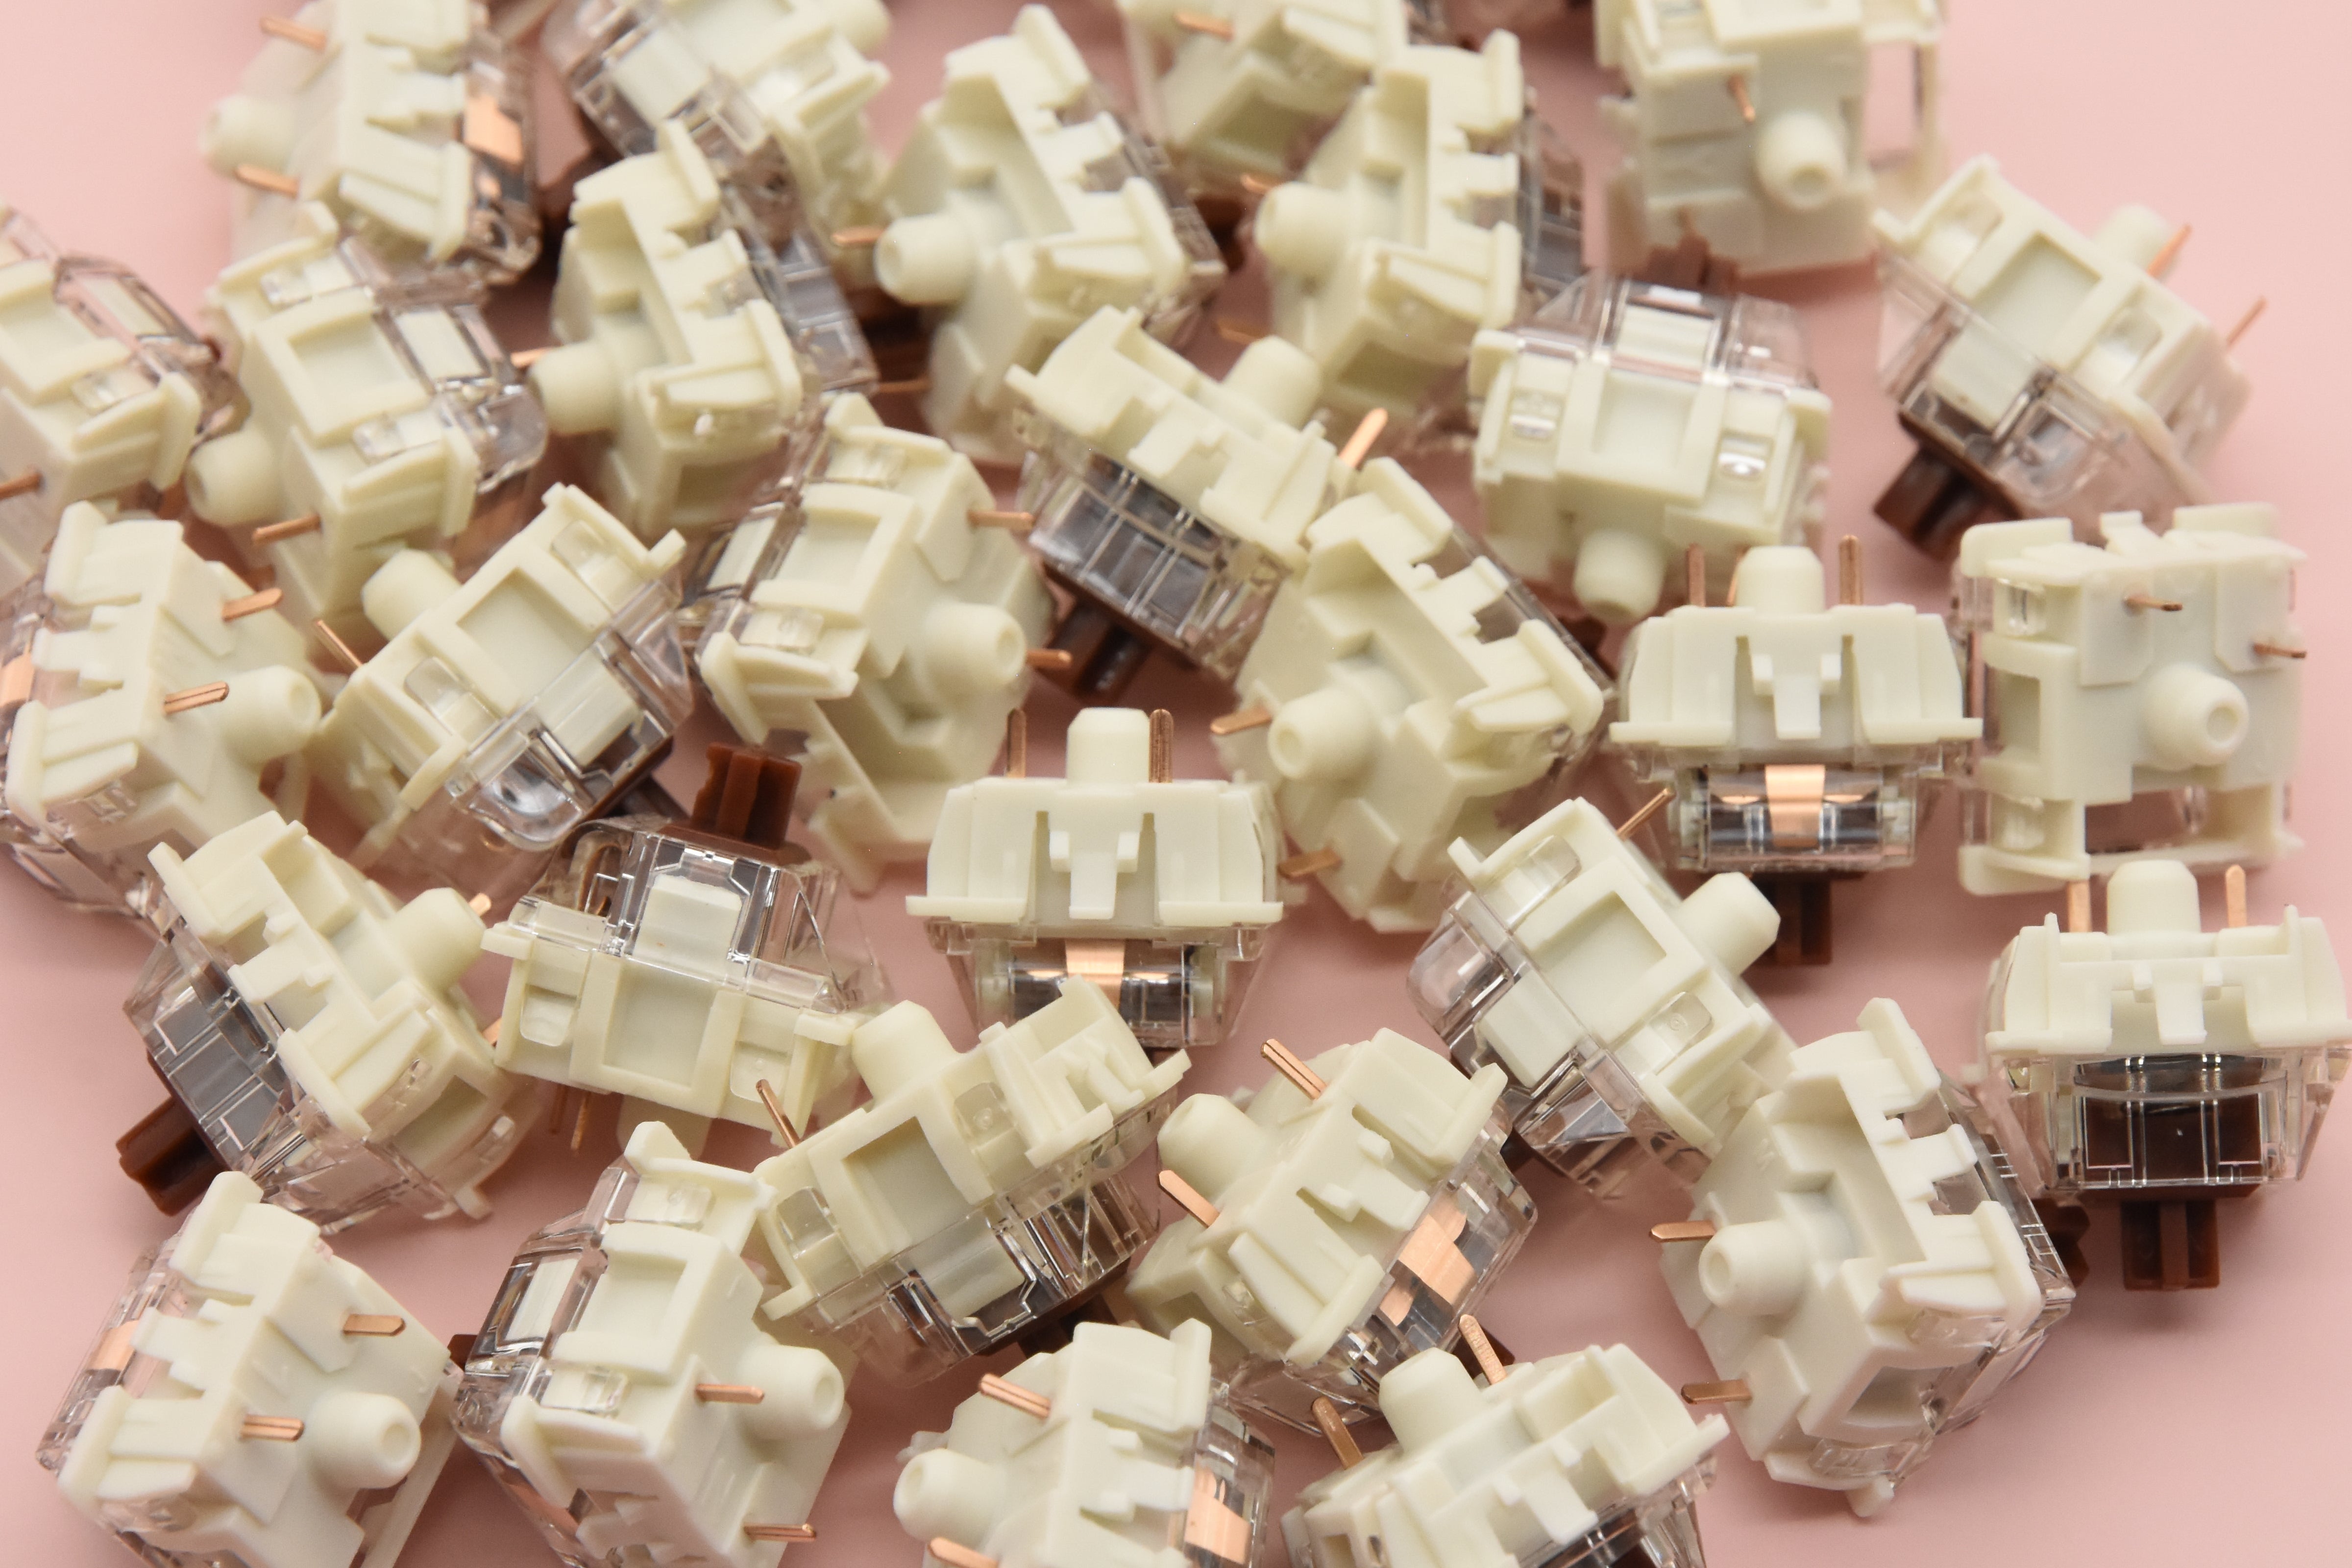 GATERON G PRO 3.0 BROWN TACTILE SWITCH FACTORY LUBED EDITION (10PCS)